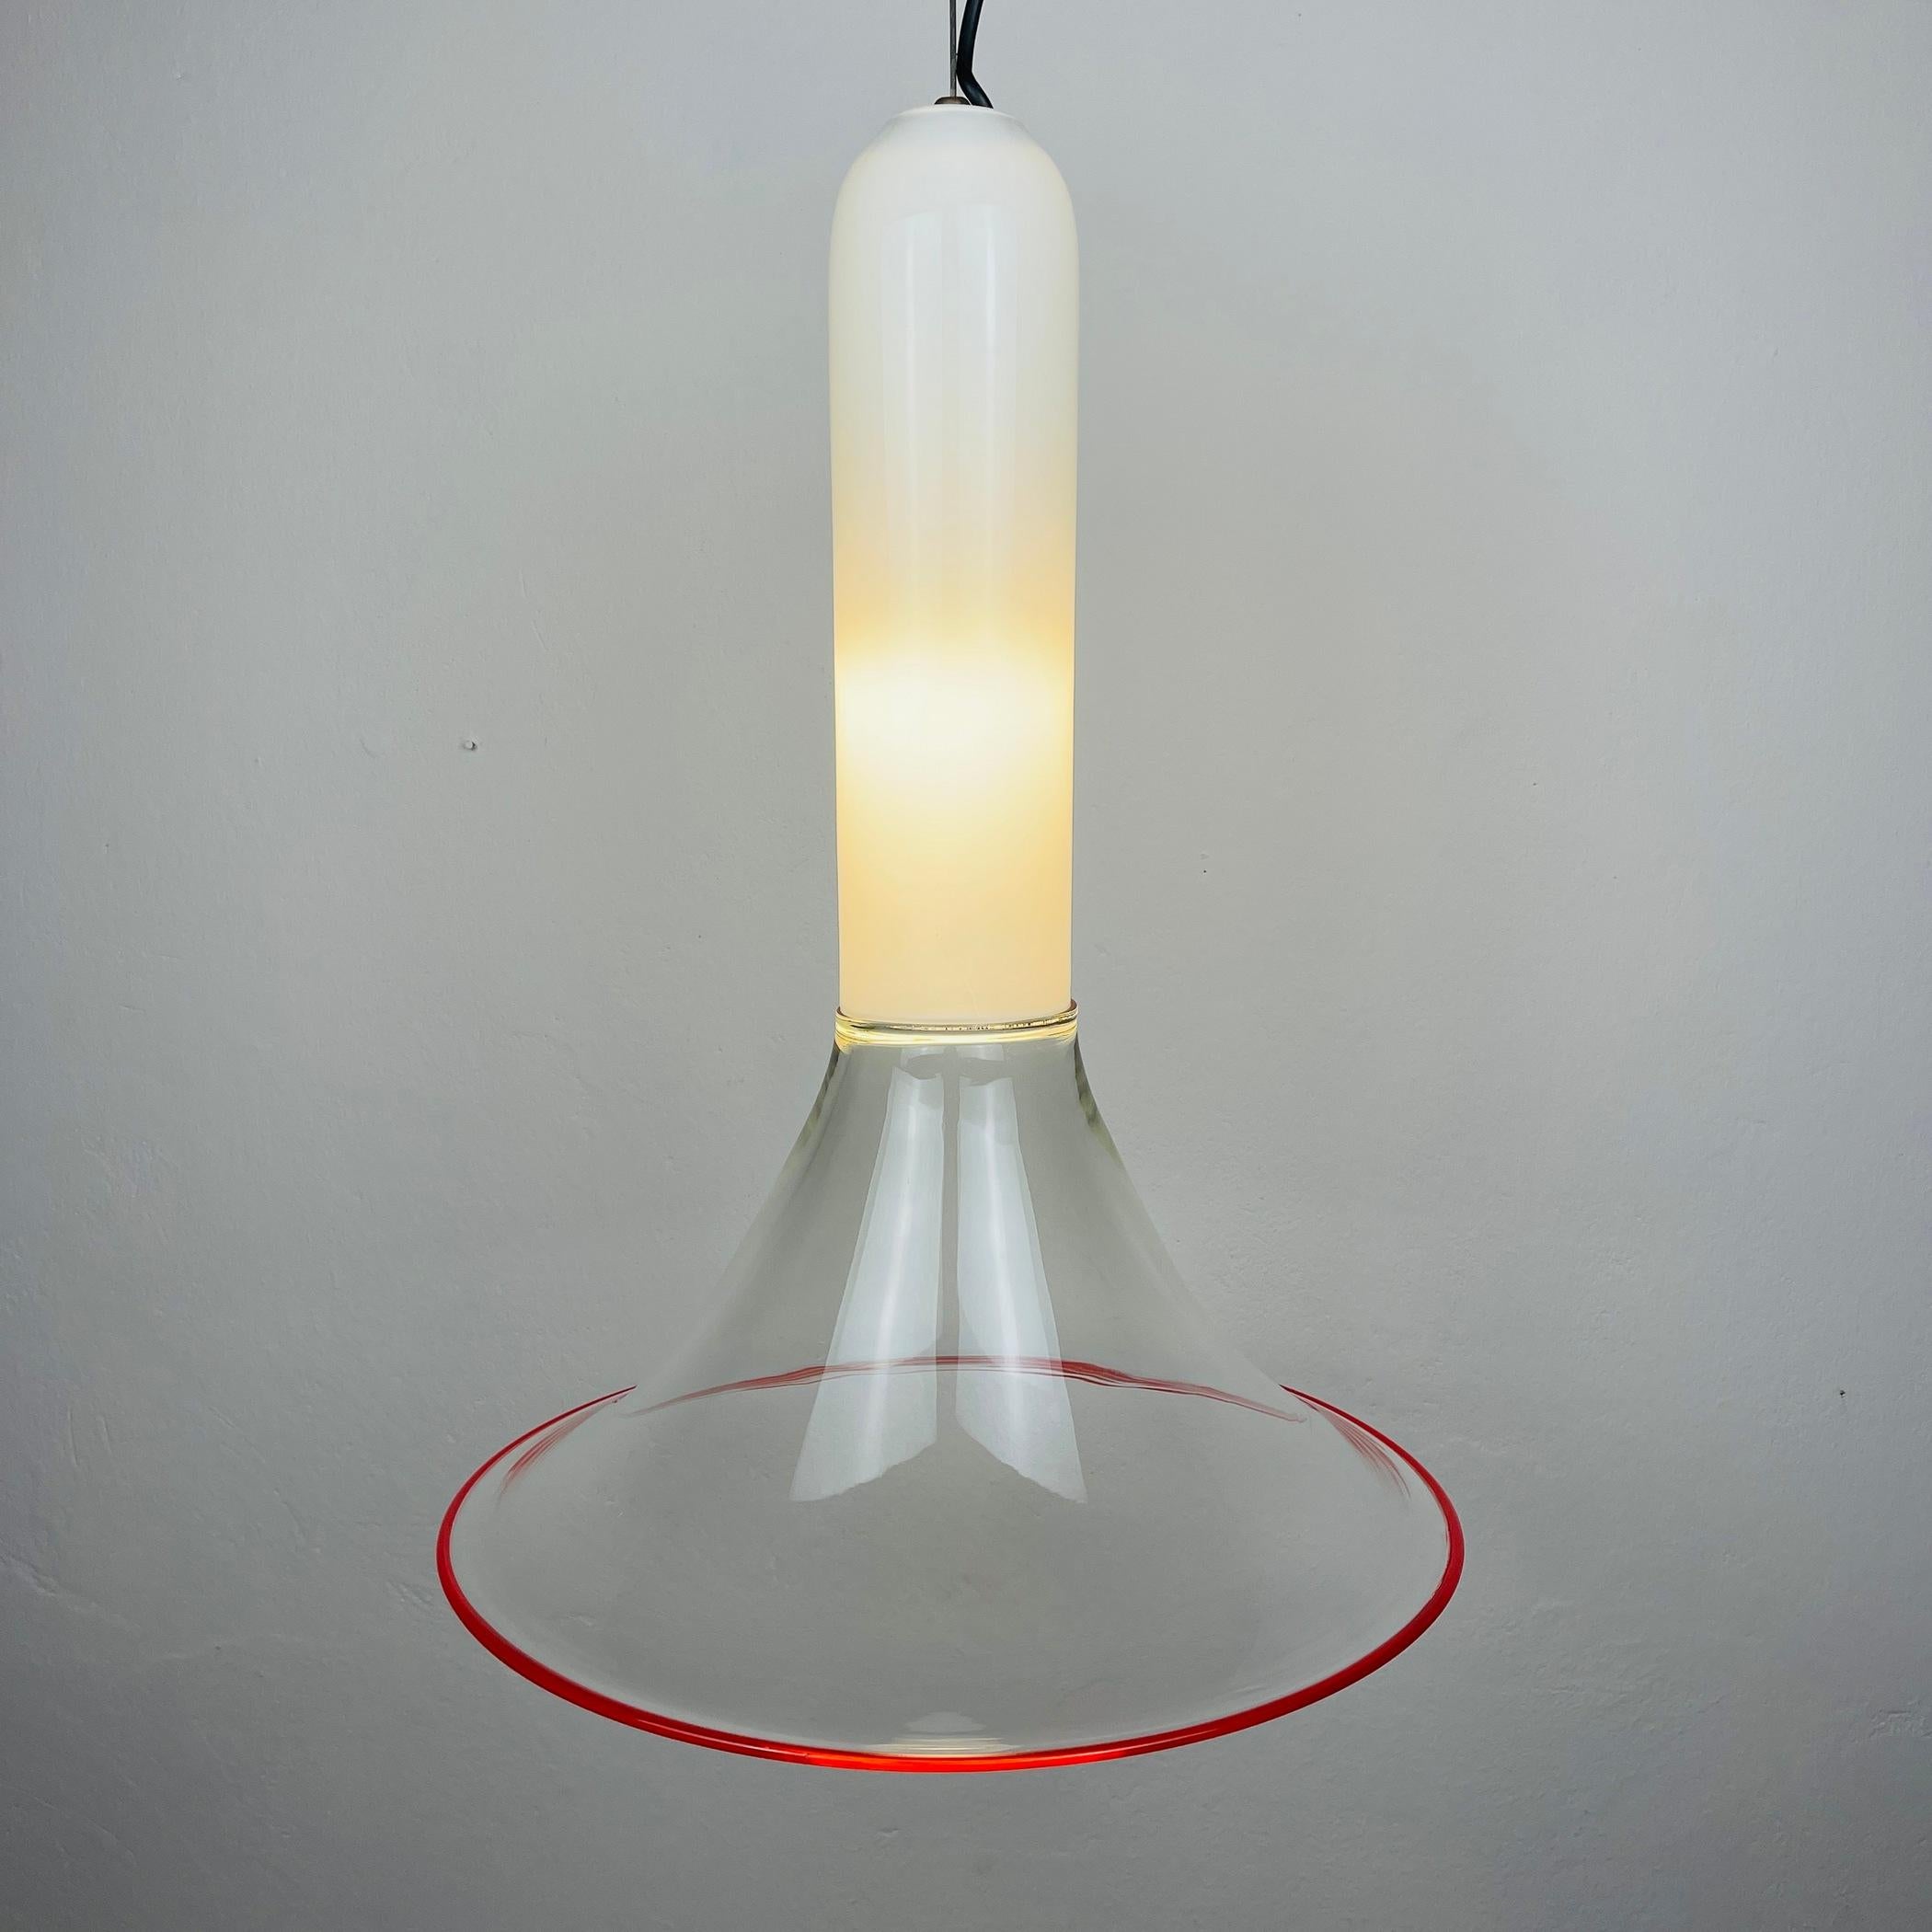 Murano pendant lamp Samanta by Roberto Pamio for Leucos Italy 1970s For Sale 5